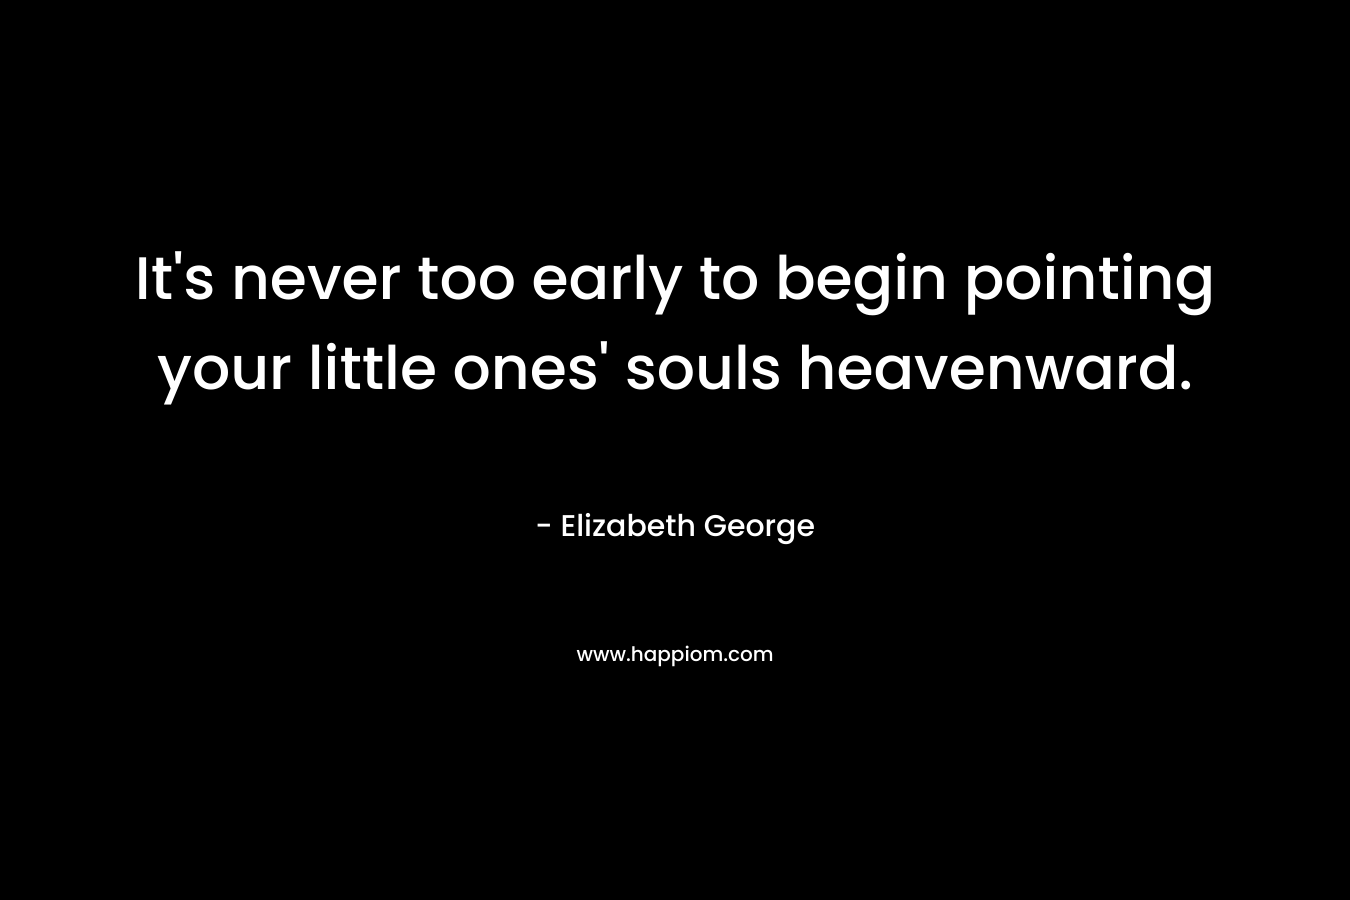 It’s never too early to begin pointing your little ones’ souls heavenward. – Elizabeth George